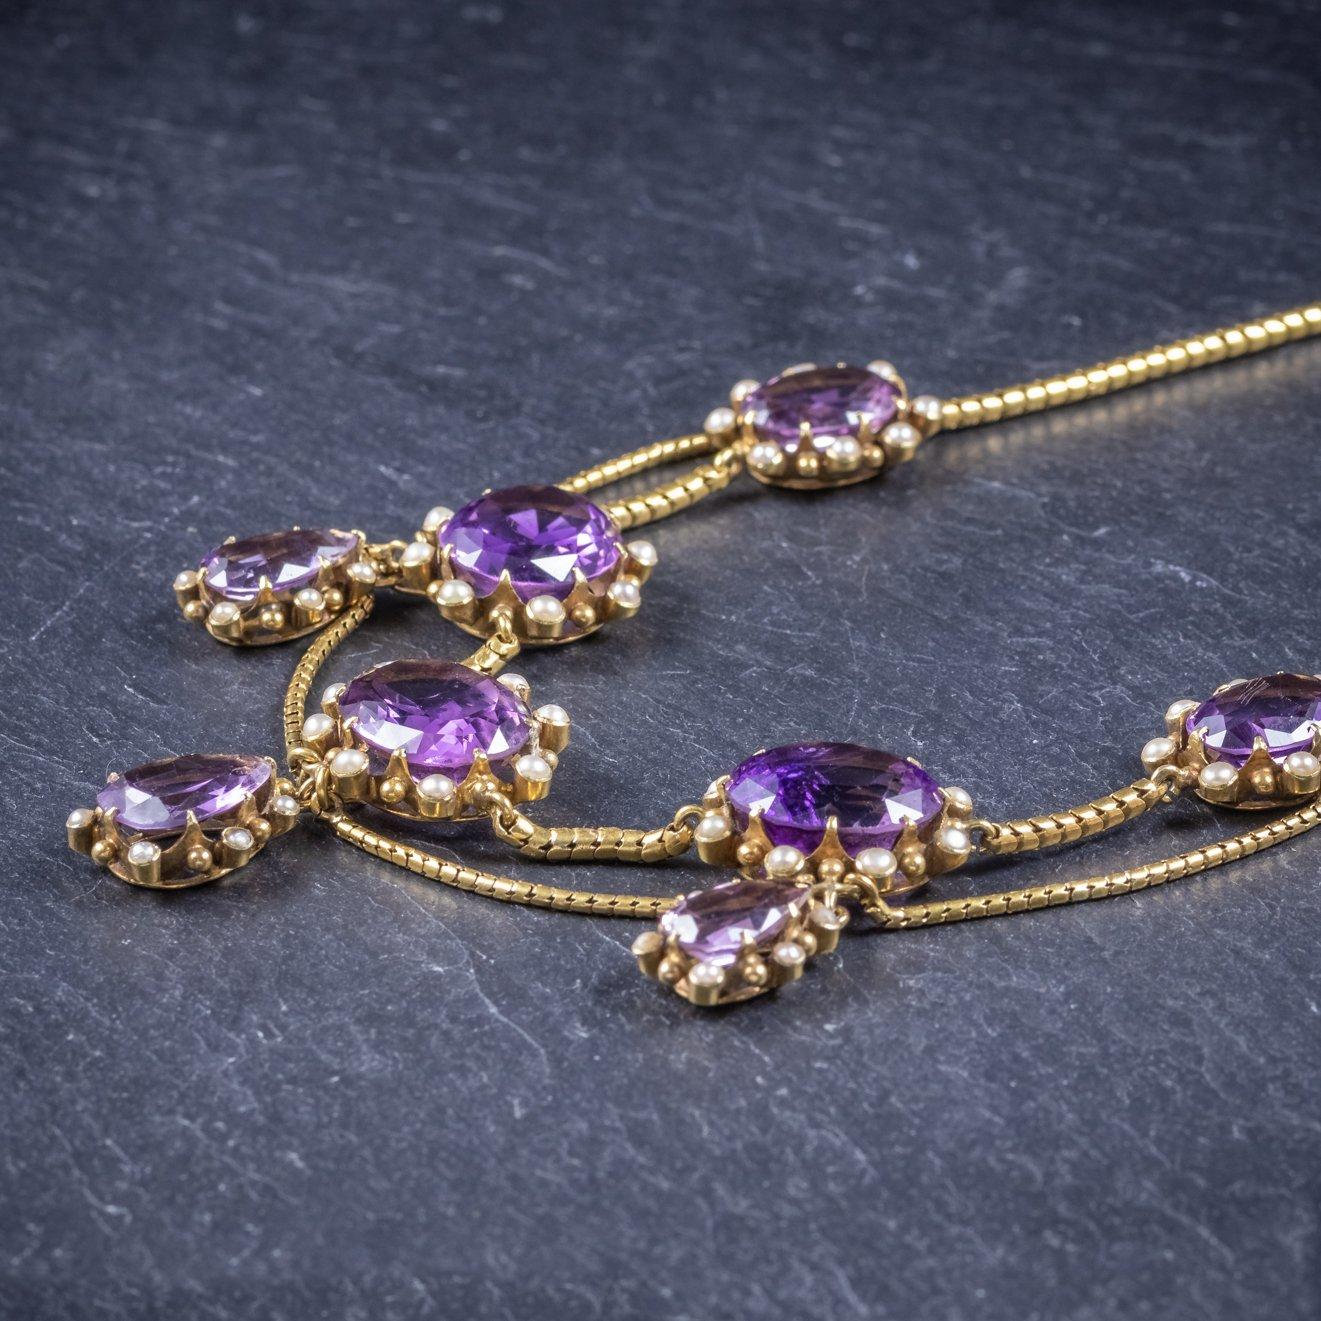 Women's Antique Victorian Amethyst Pearl Garland Necklace 18ct Gold, circa 1860 For Sale